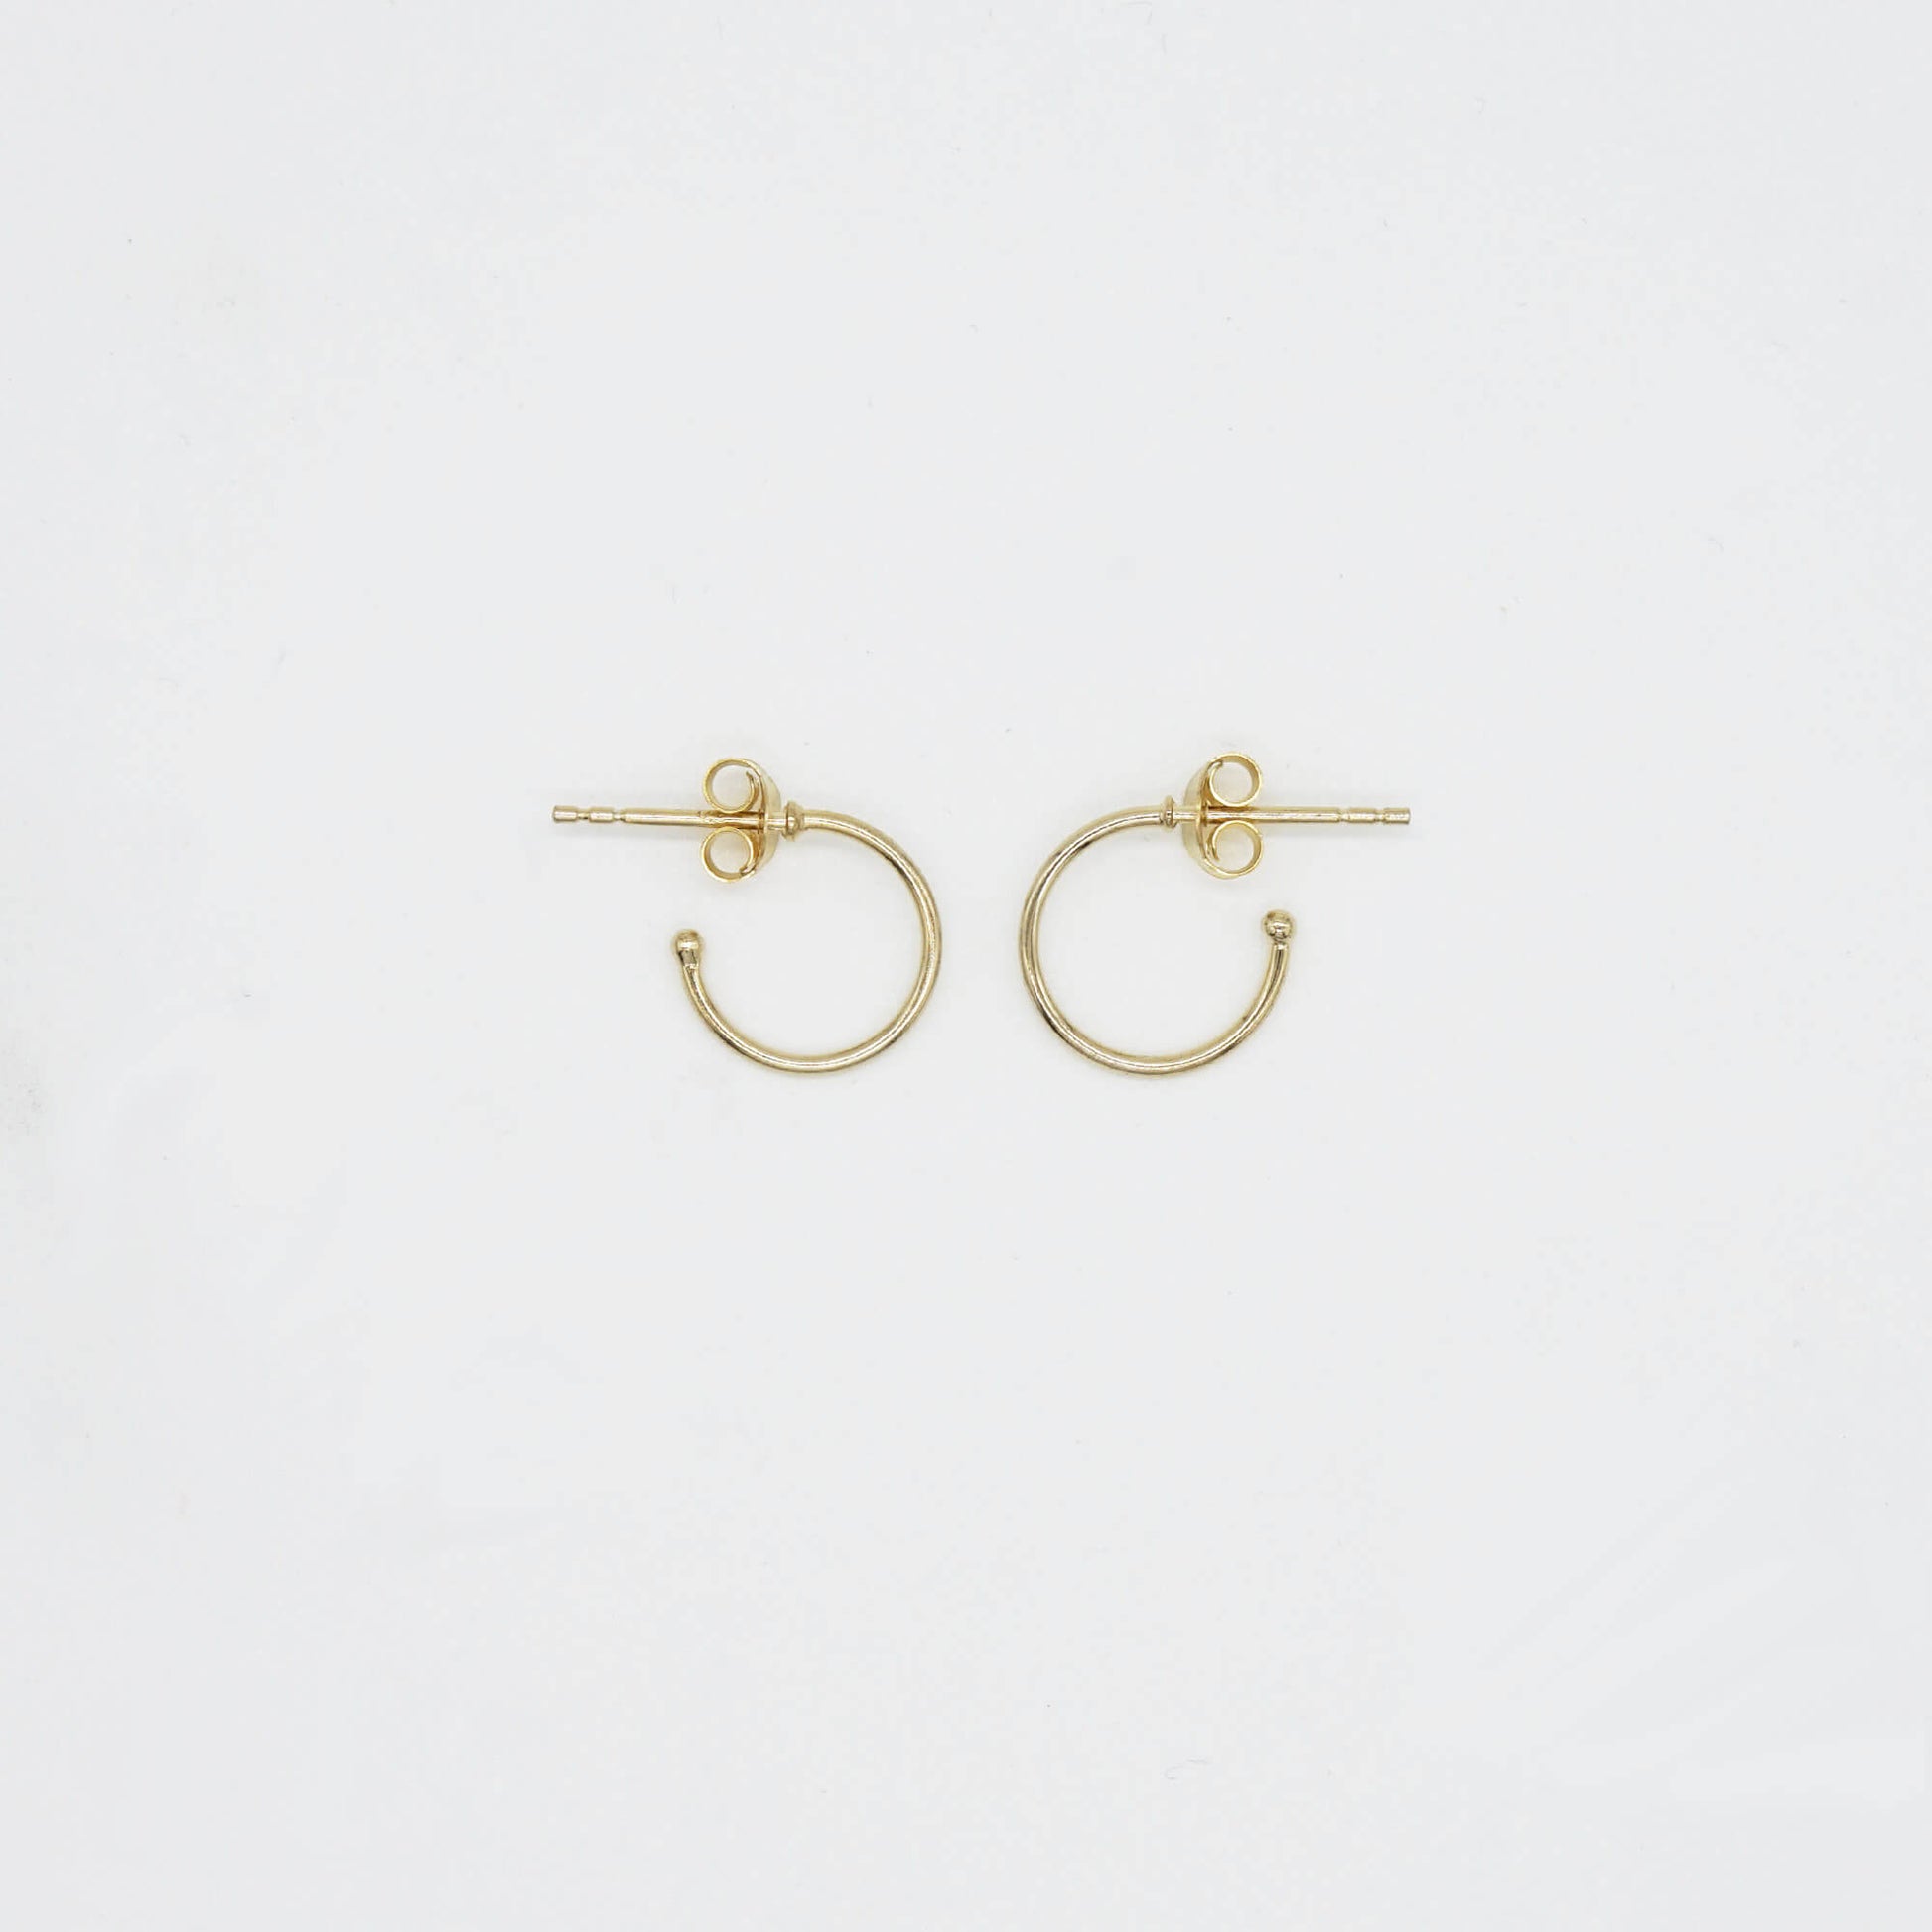 PAIR OF FINE OPEN HOOP EARRINGS WITH POST BACK IN REAL GOLD PLATE OVER STERLING SILVER.